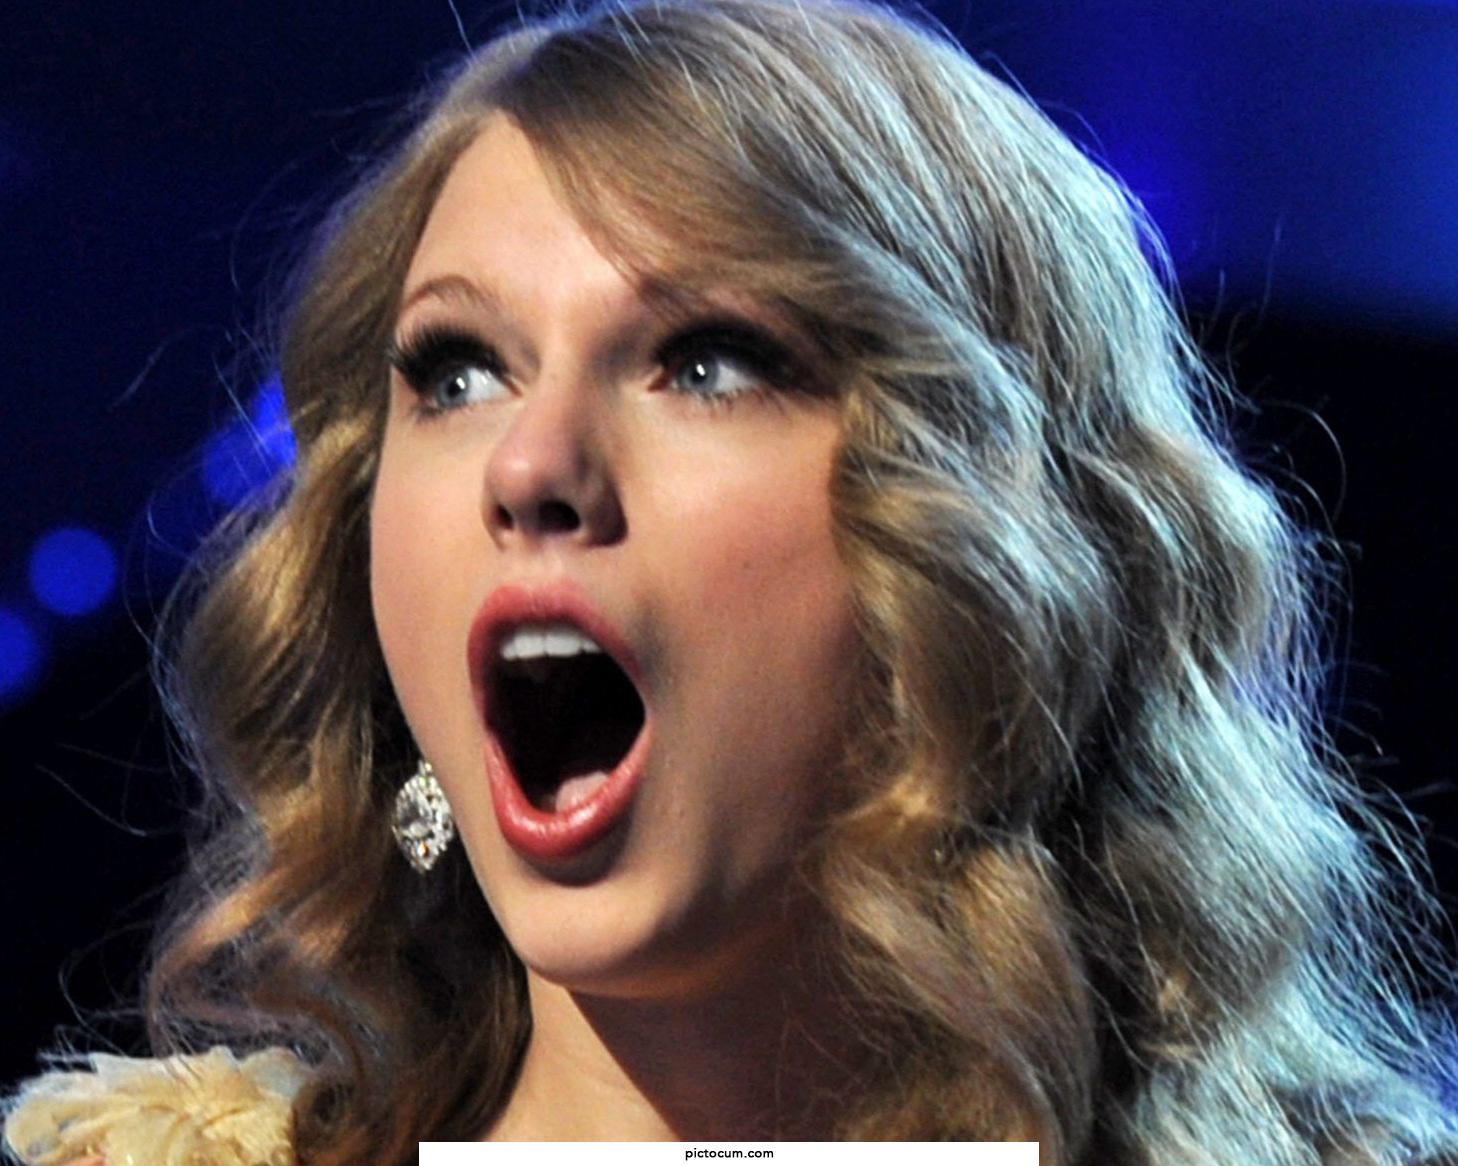 Taylor Swift's mouth is perfect for giving wonderful blowjobs